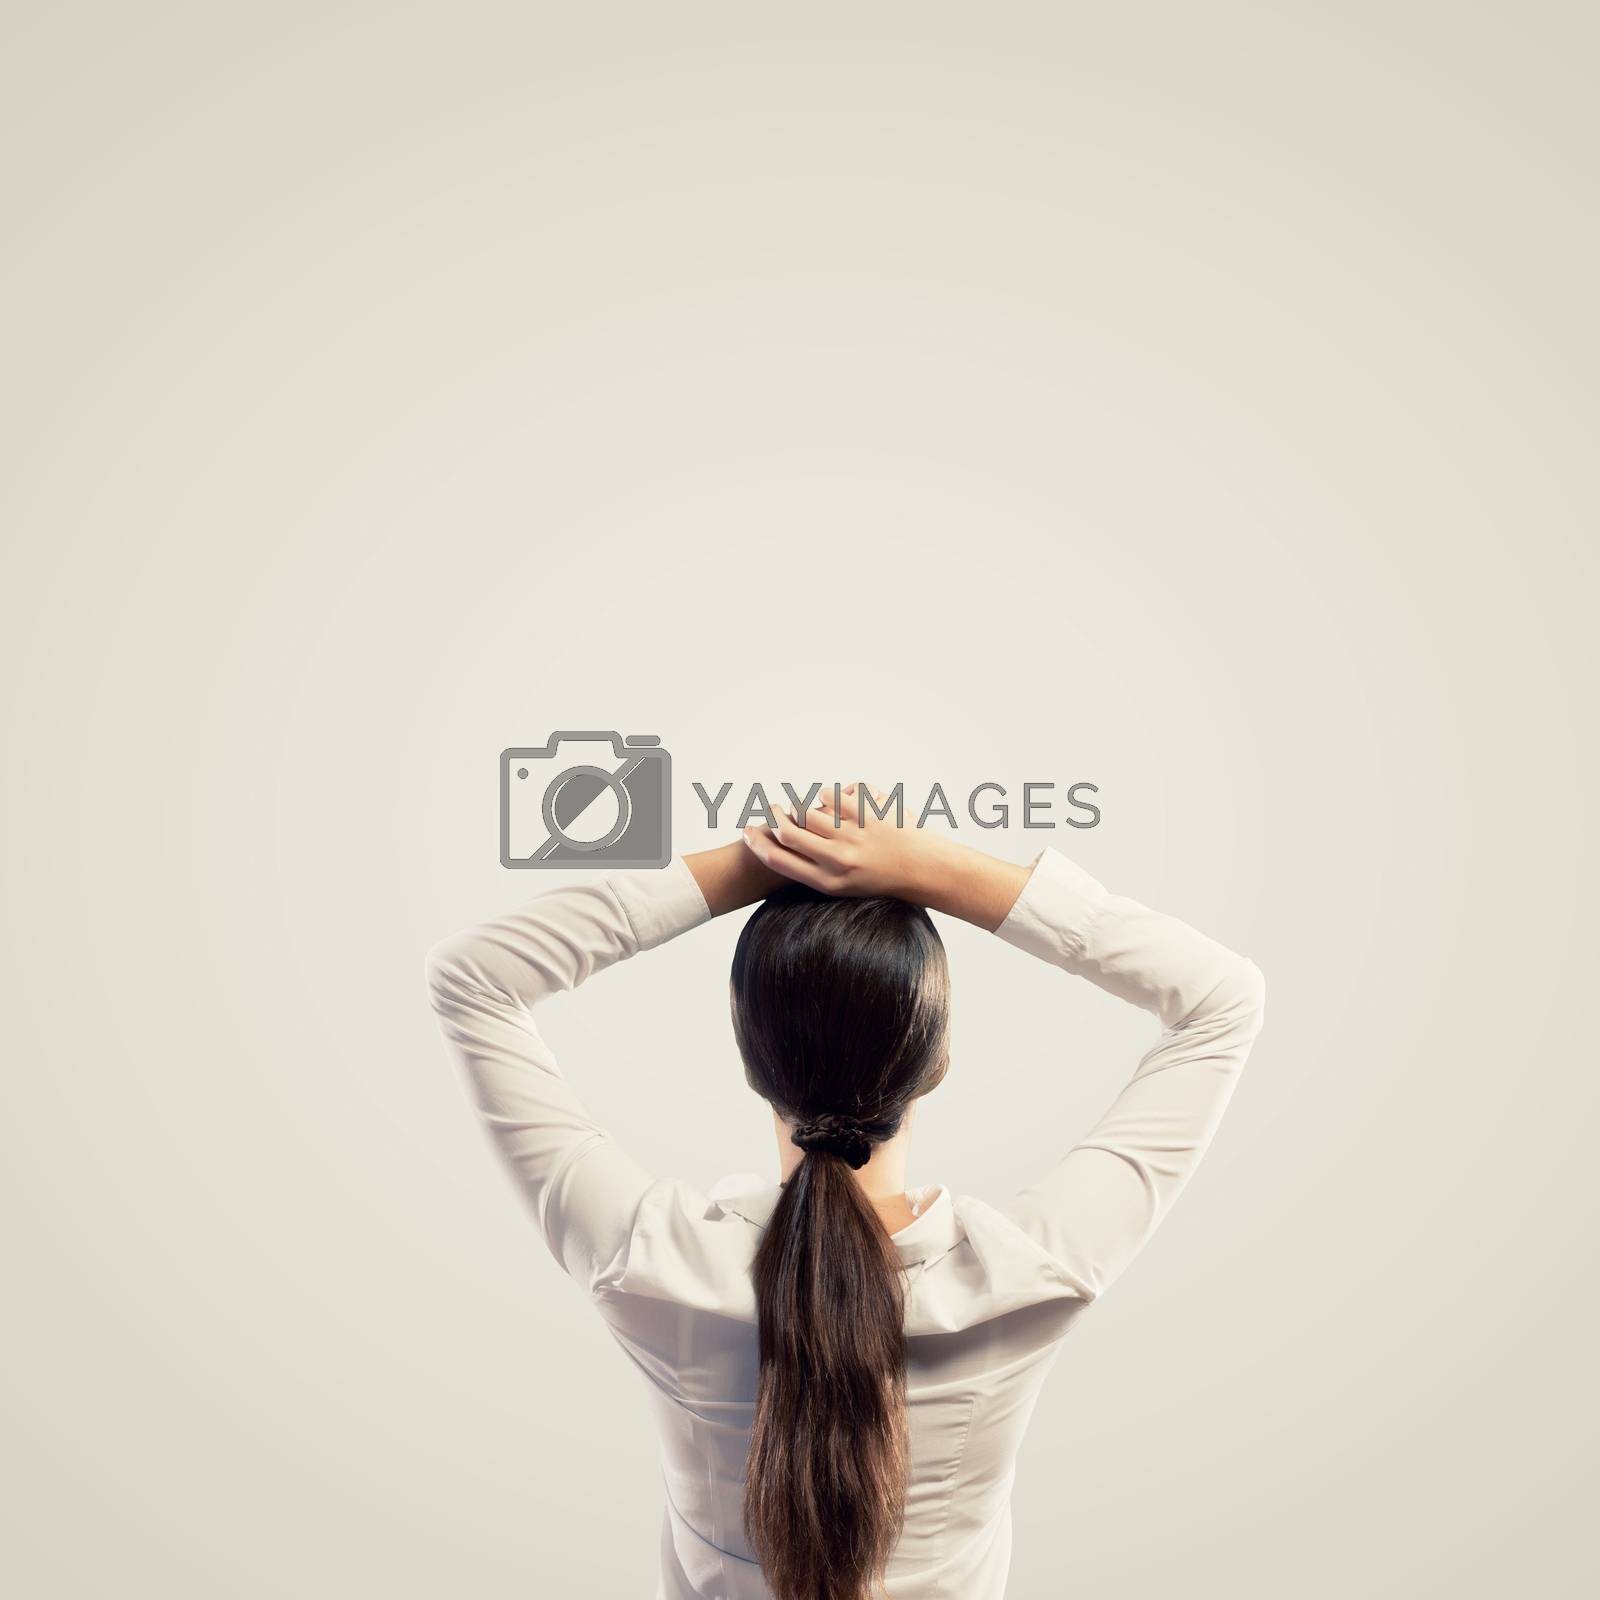 Royalty free image of Young woman standing with back by sergey_nivens